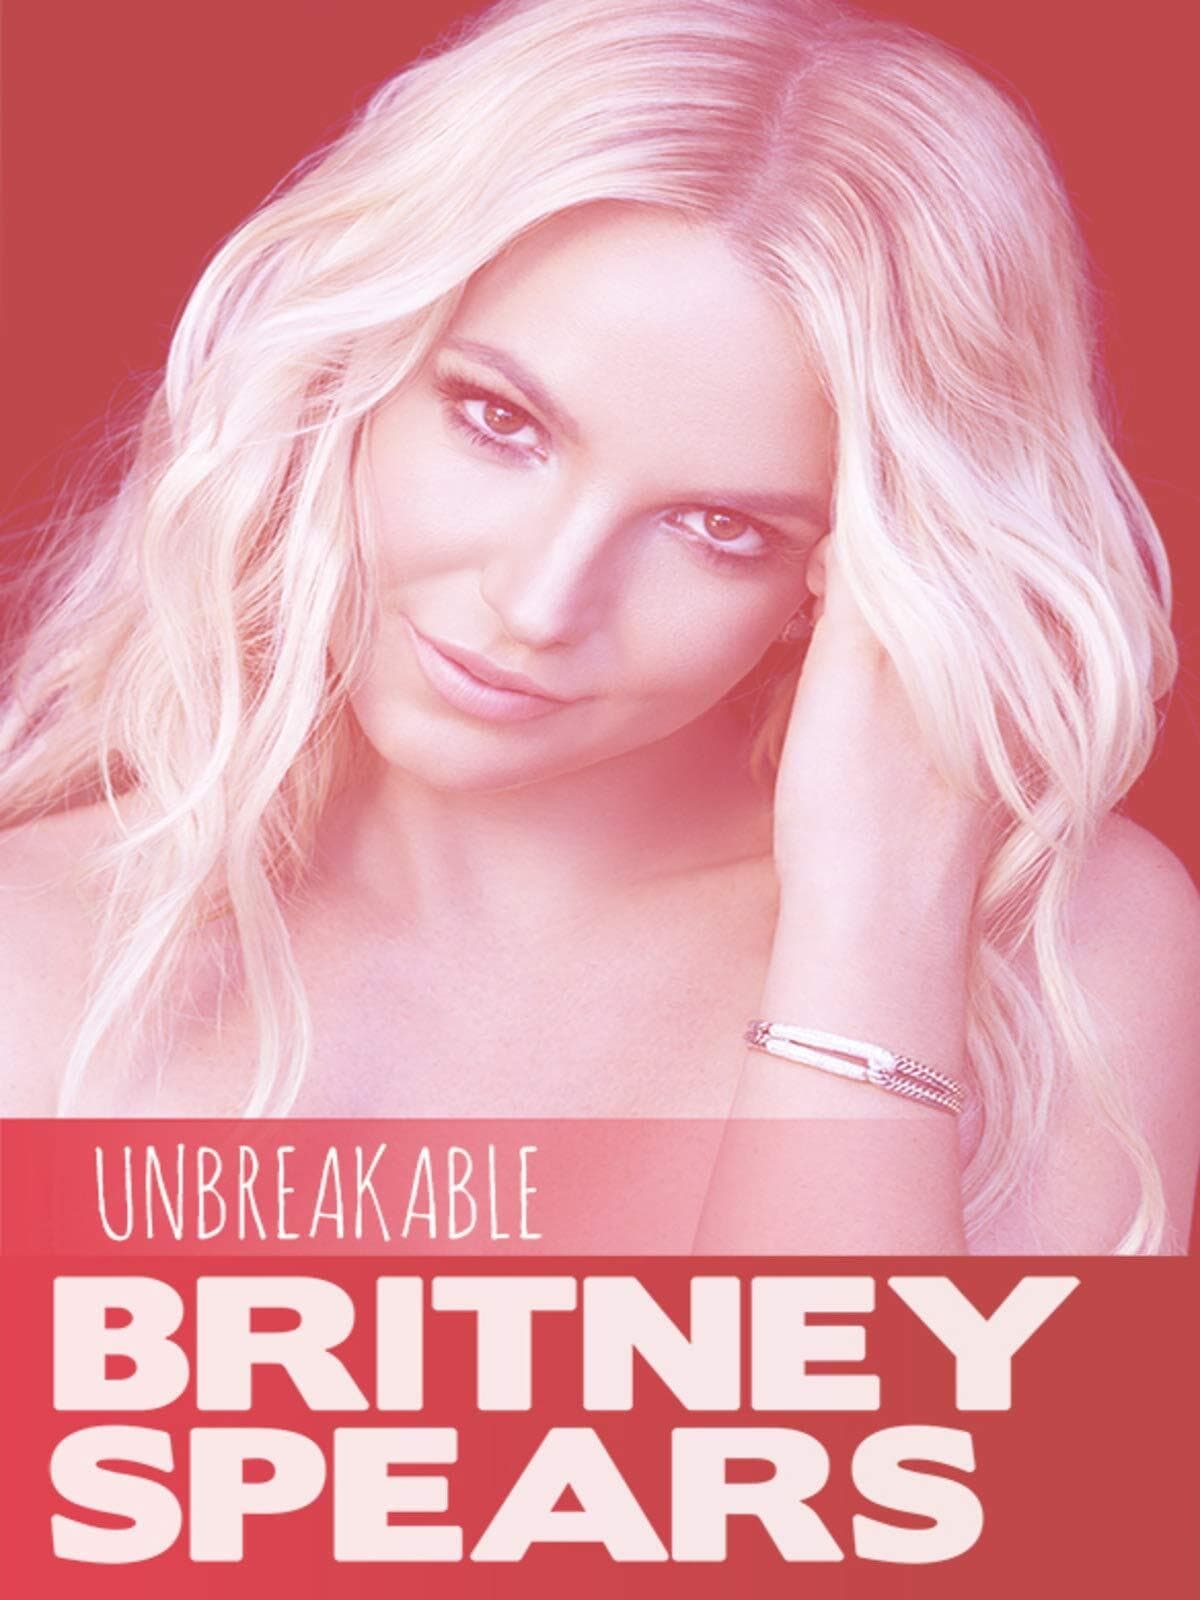 Britney Spears: Unbreakable on FREECABLE TV